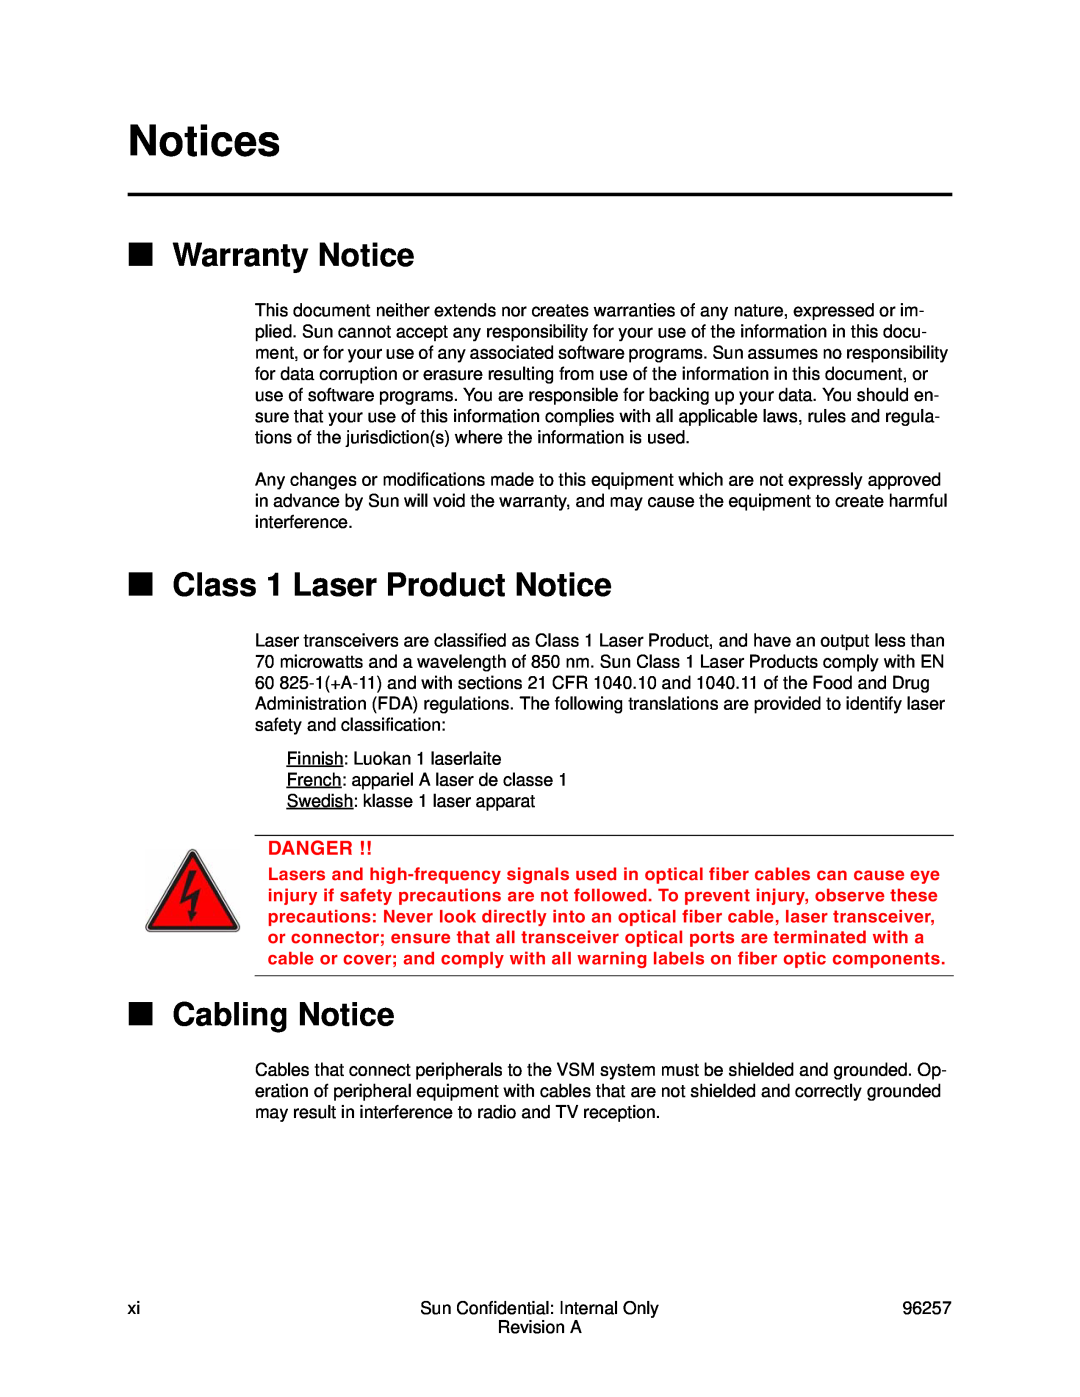 Sun Microsystems 96257 manual Notices, Warranty Notice, Class 1 Laser Product Notice, Cabling Notice, Danger 